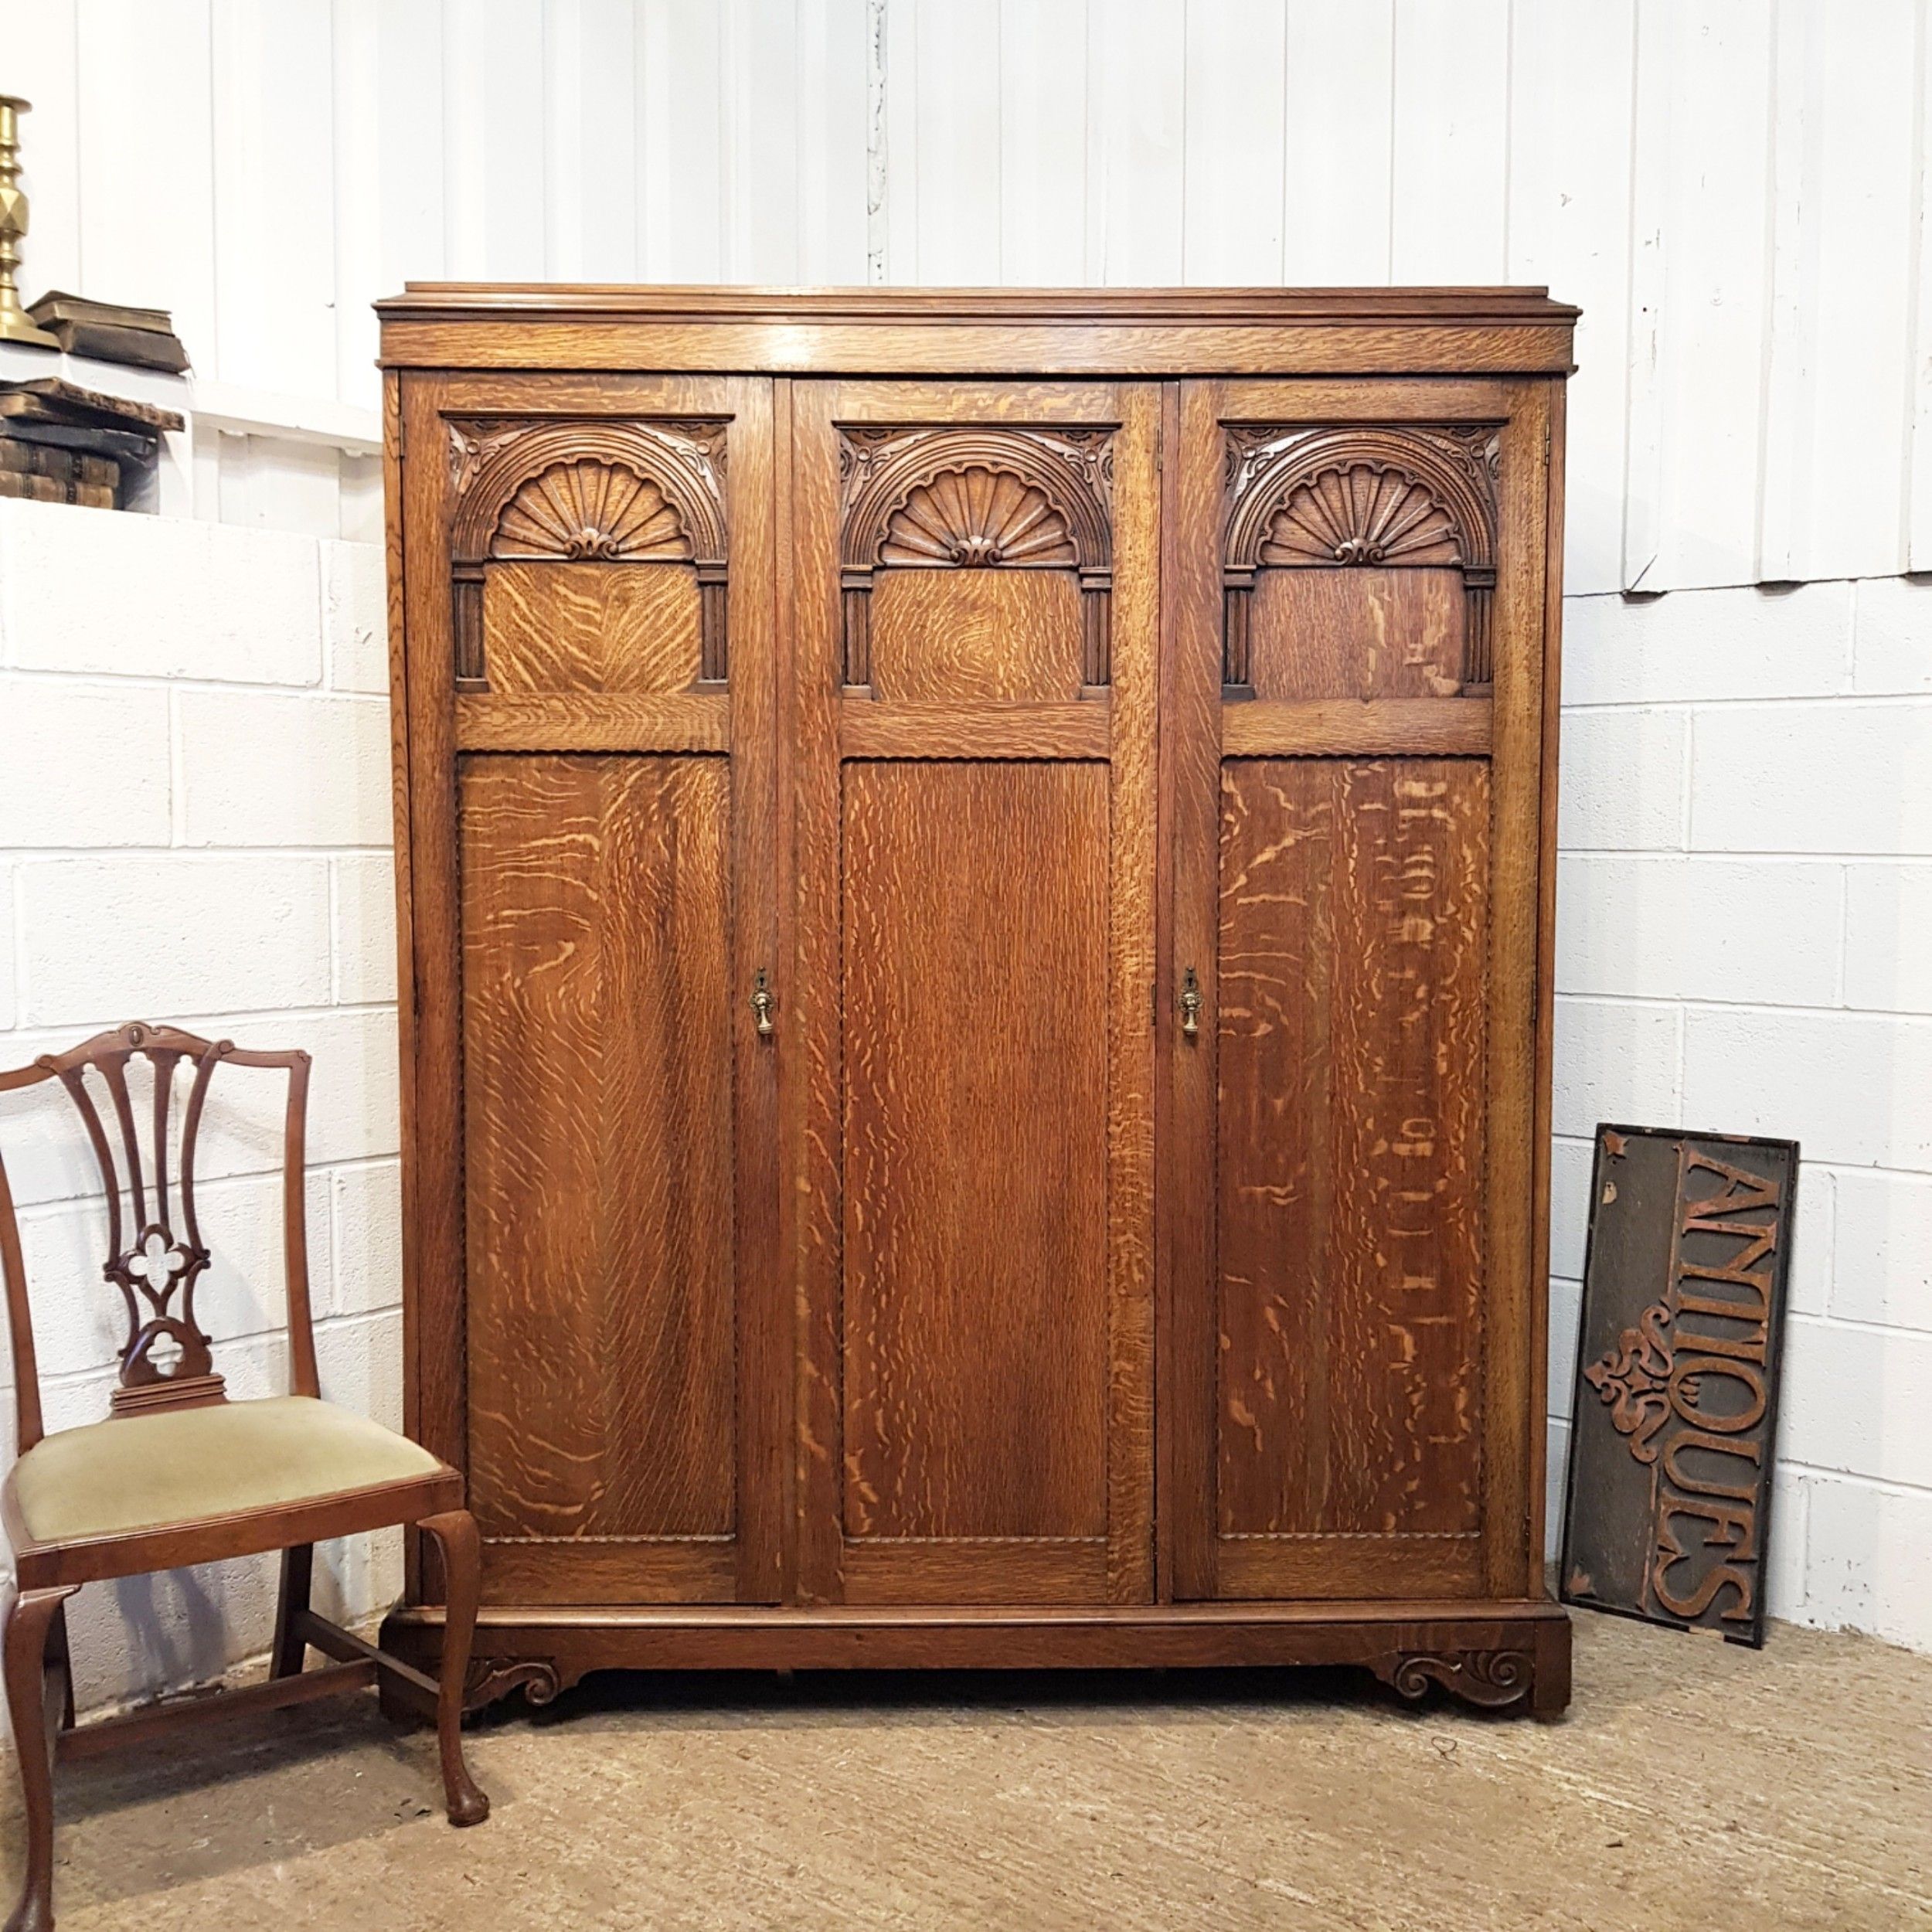 Antique Carved Oak Small Triple Wardrobe C1920 | 1003309 |  Sellingantiques.co (View 11 of 15)